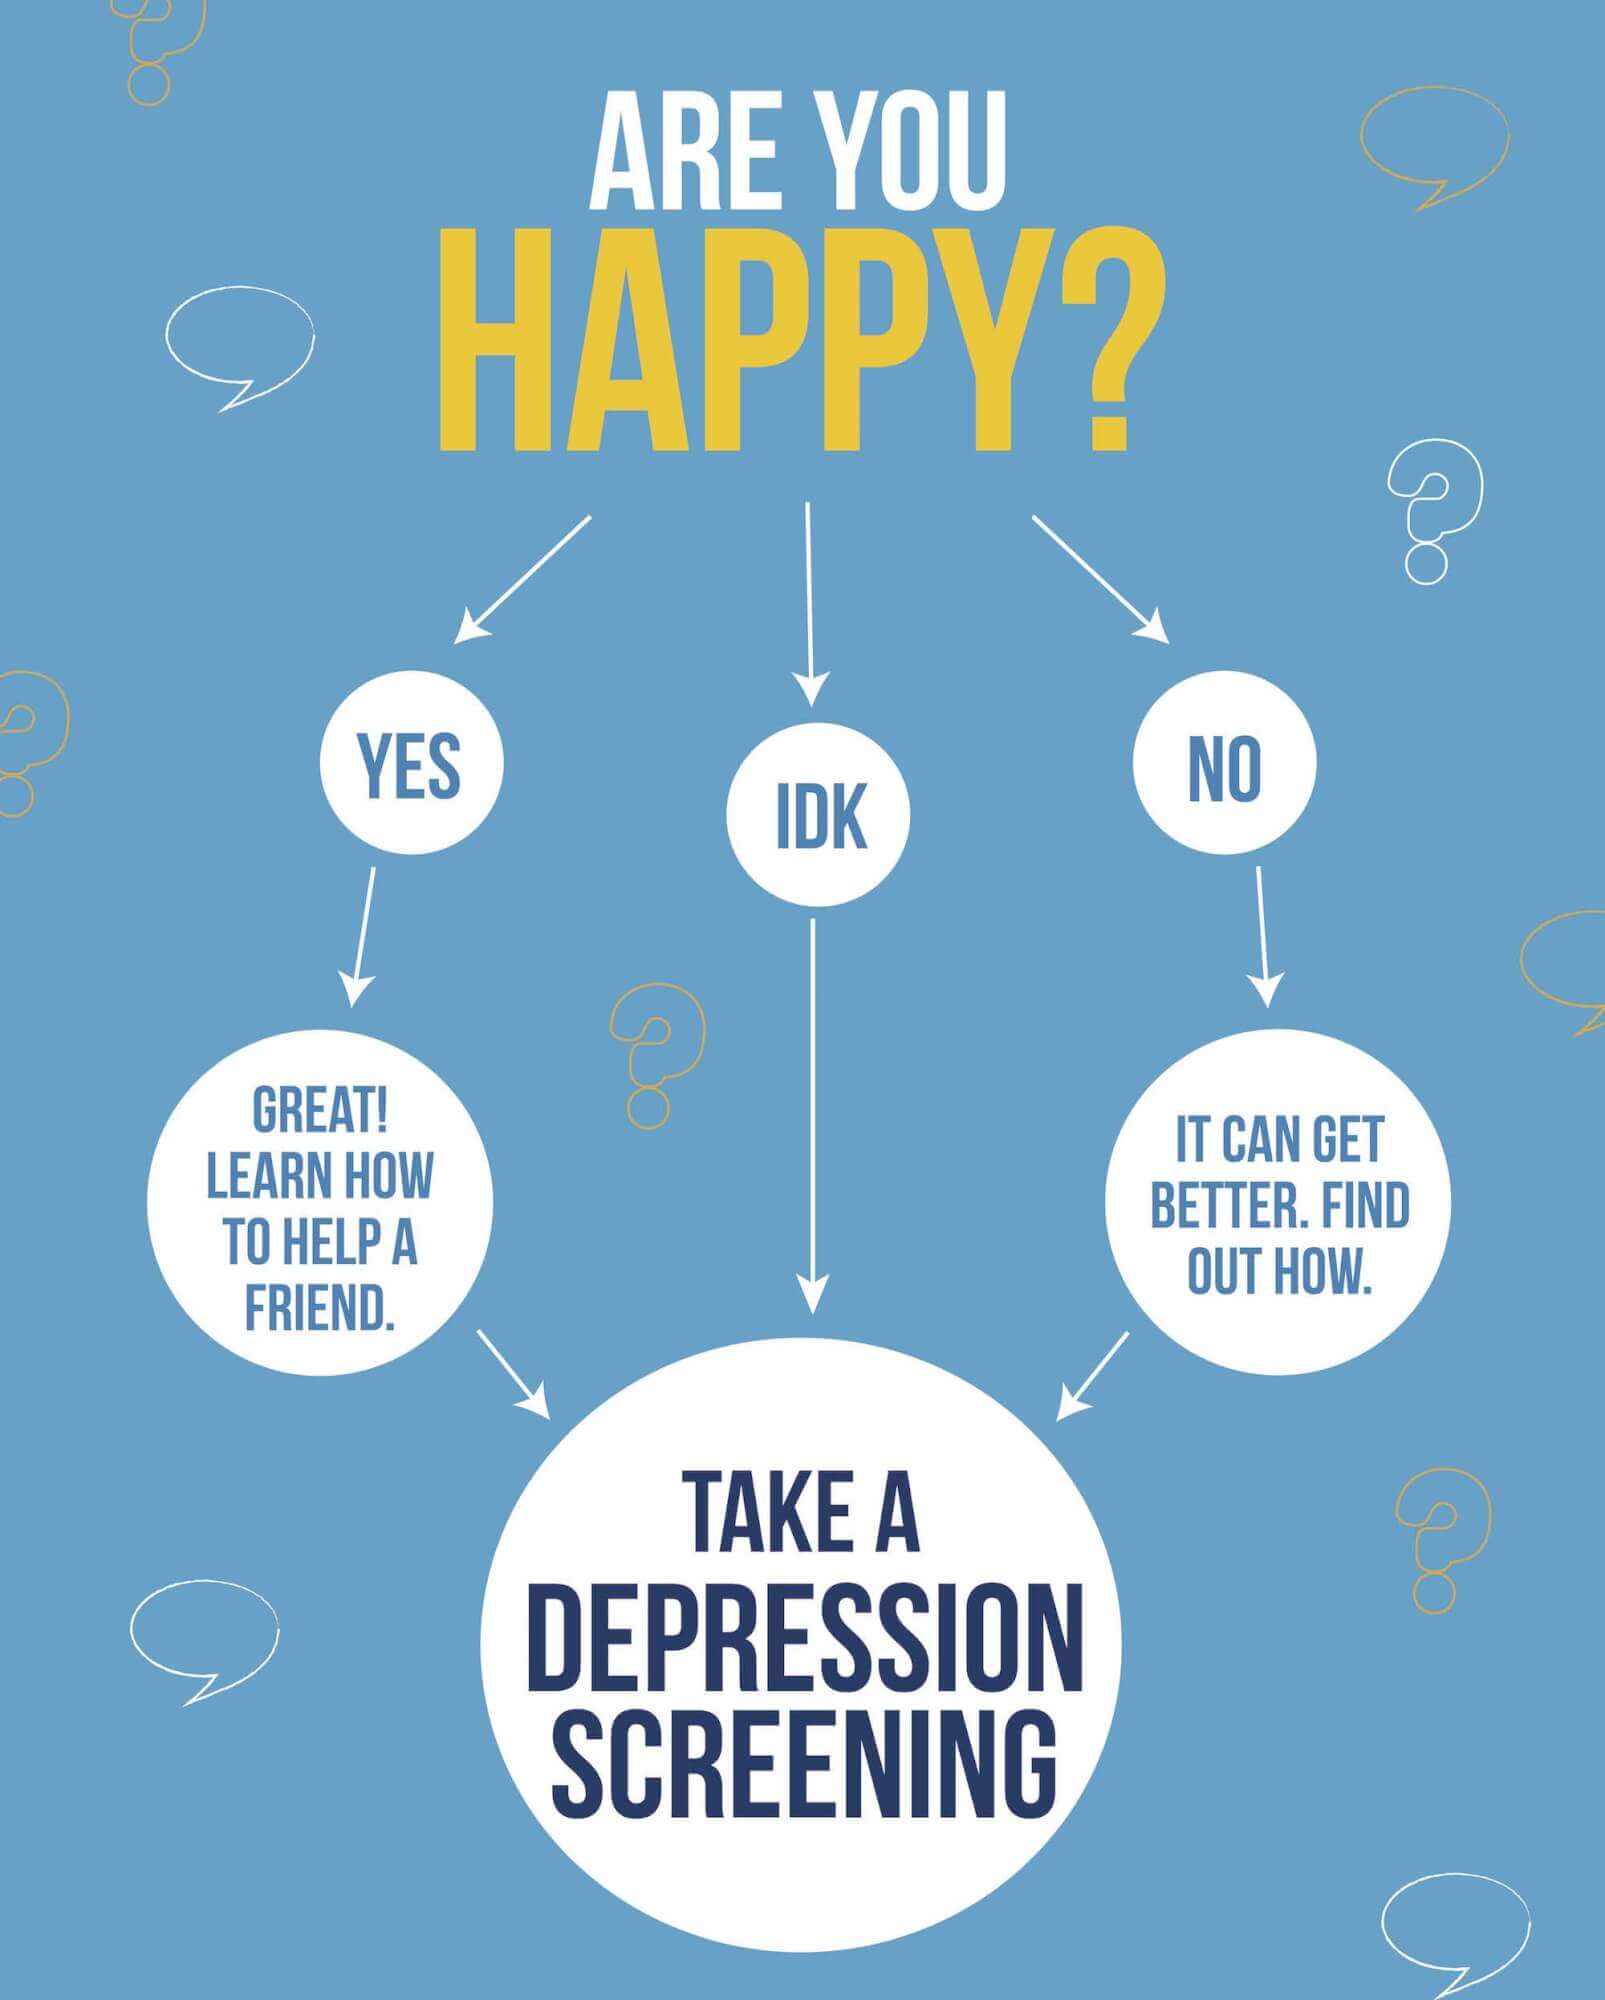 A quiz that directs people to get a depression screening